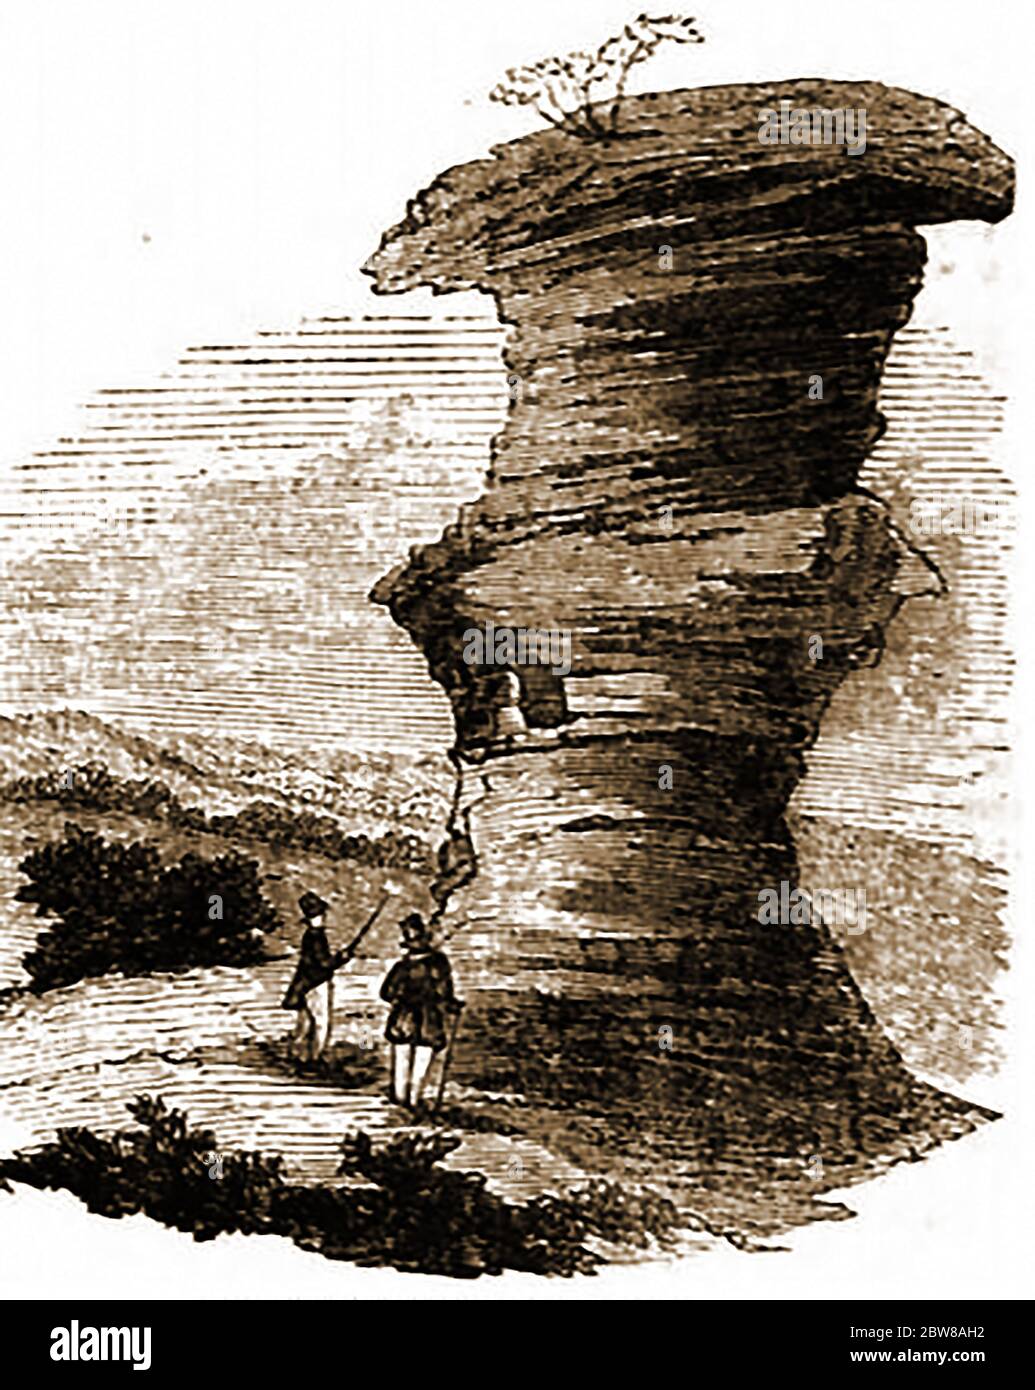 The Hemlock Stone/ Himlack Stone , Stapleford Hill (Bramcote Hills), near Stapleford, Nottinghamshire, England as it was in 1842.The stone is now protected by an iron fence and the stack is  little changed, though wind and weather erosion continues. The stone is mentioned in D.H. Lawrence's novel Sons and Lovers and  an annual free festival, the Hemlock Happening, is held for one day  each June. Stock Photo